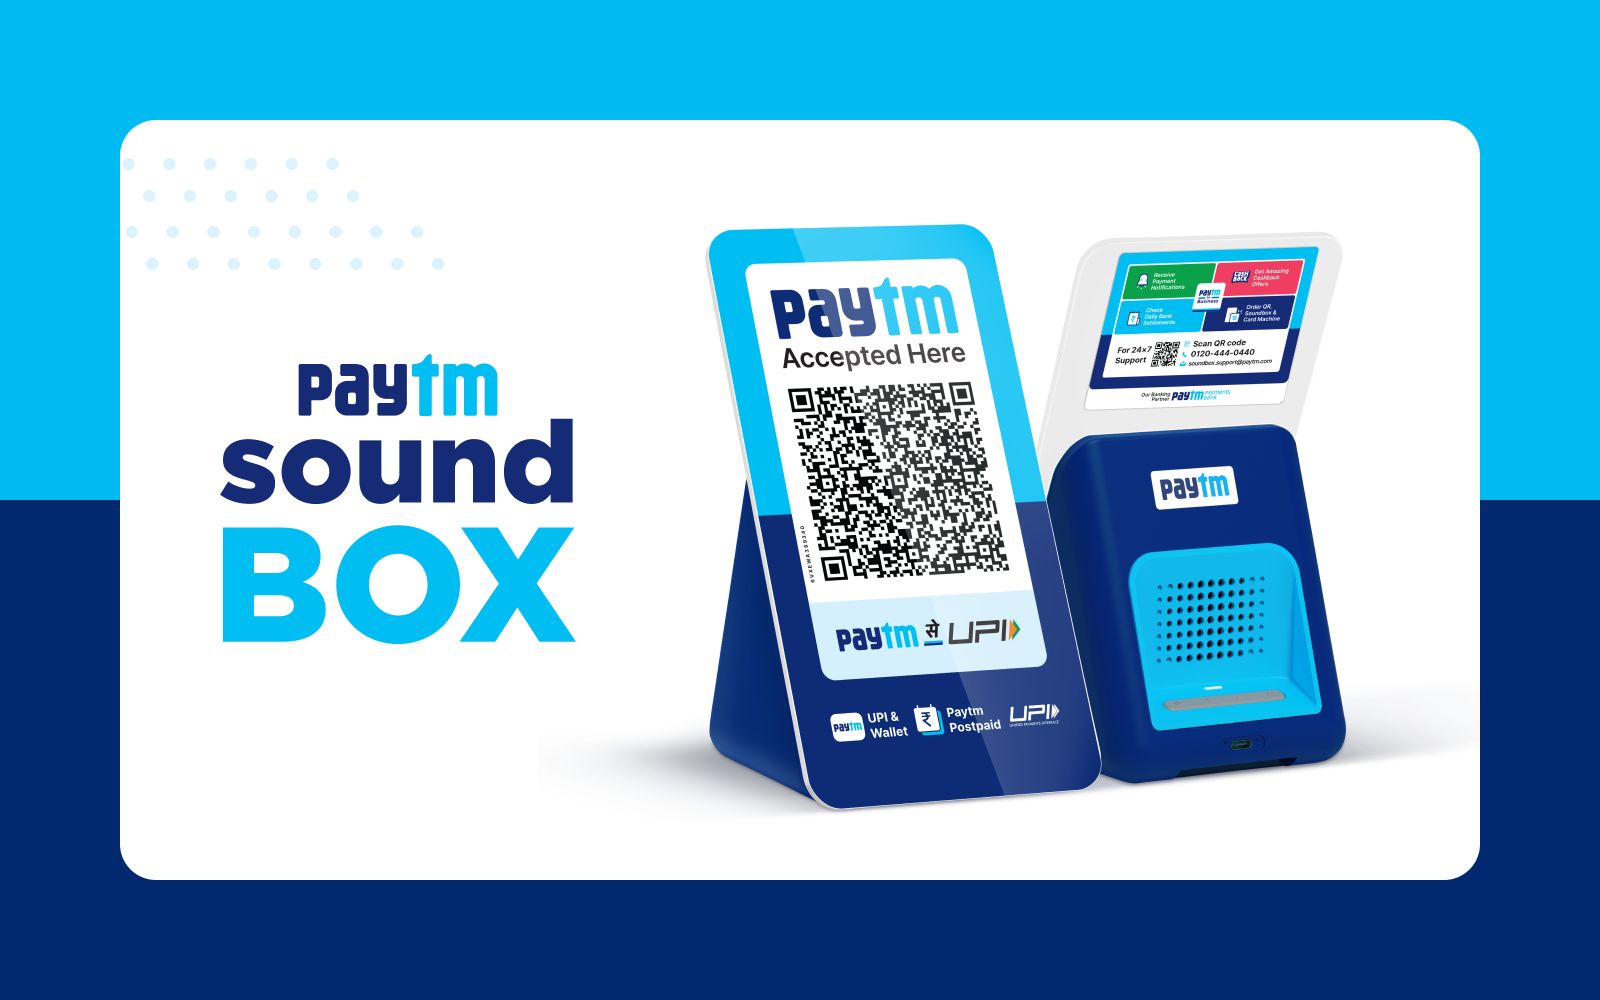 Device Deployment Hits 1 Million for Two Straight Quarters: How Paytm Soundbox is Fuelling Growth | Paytm Blog